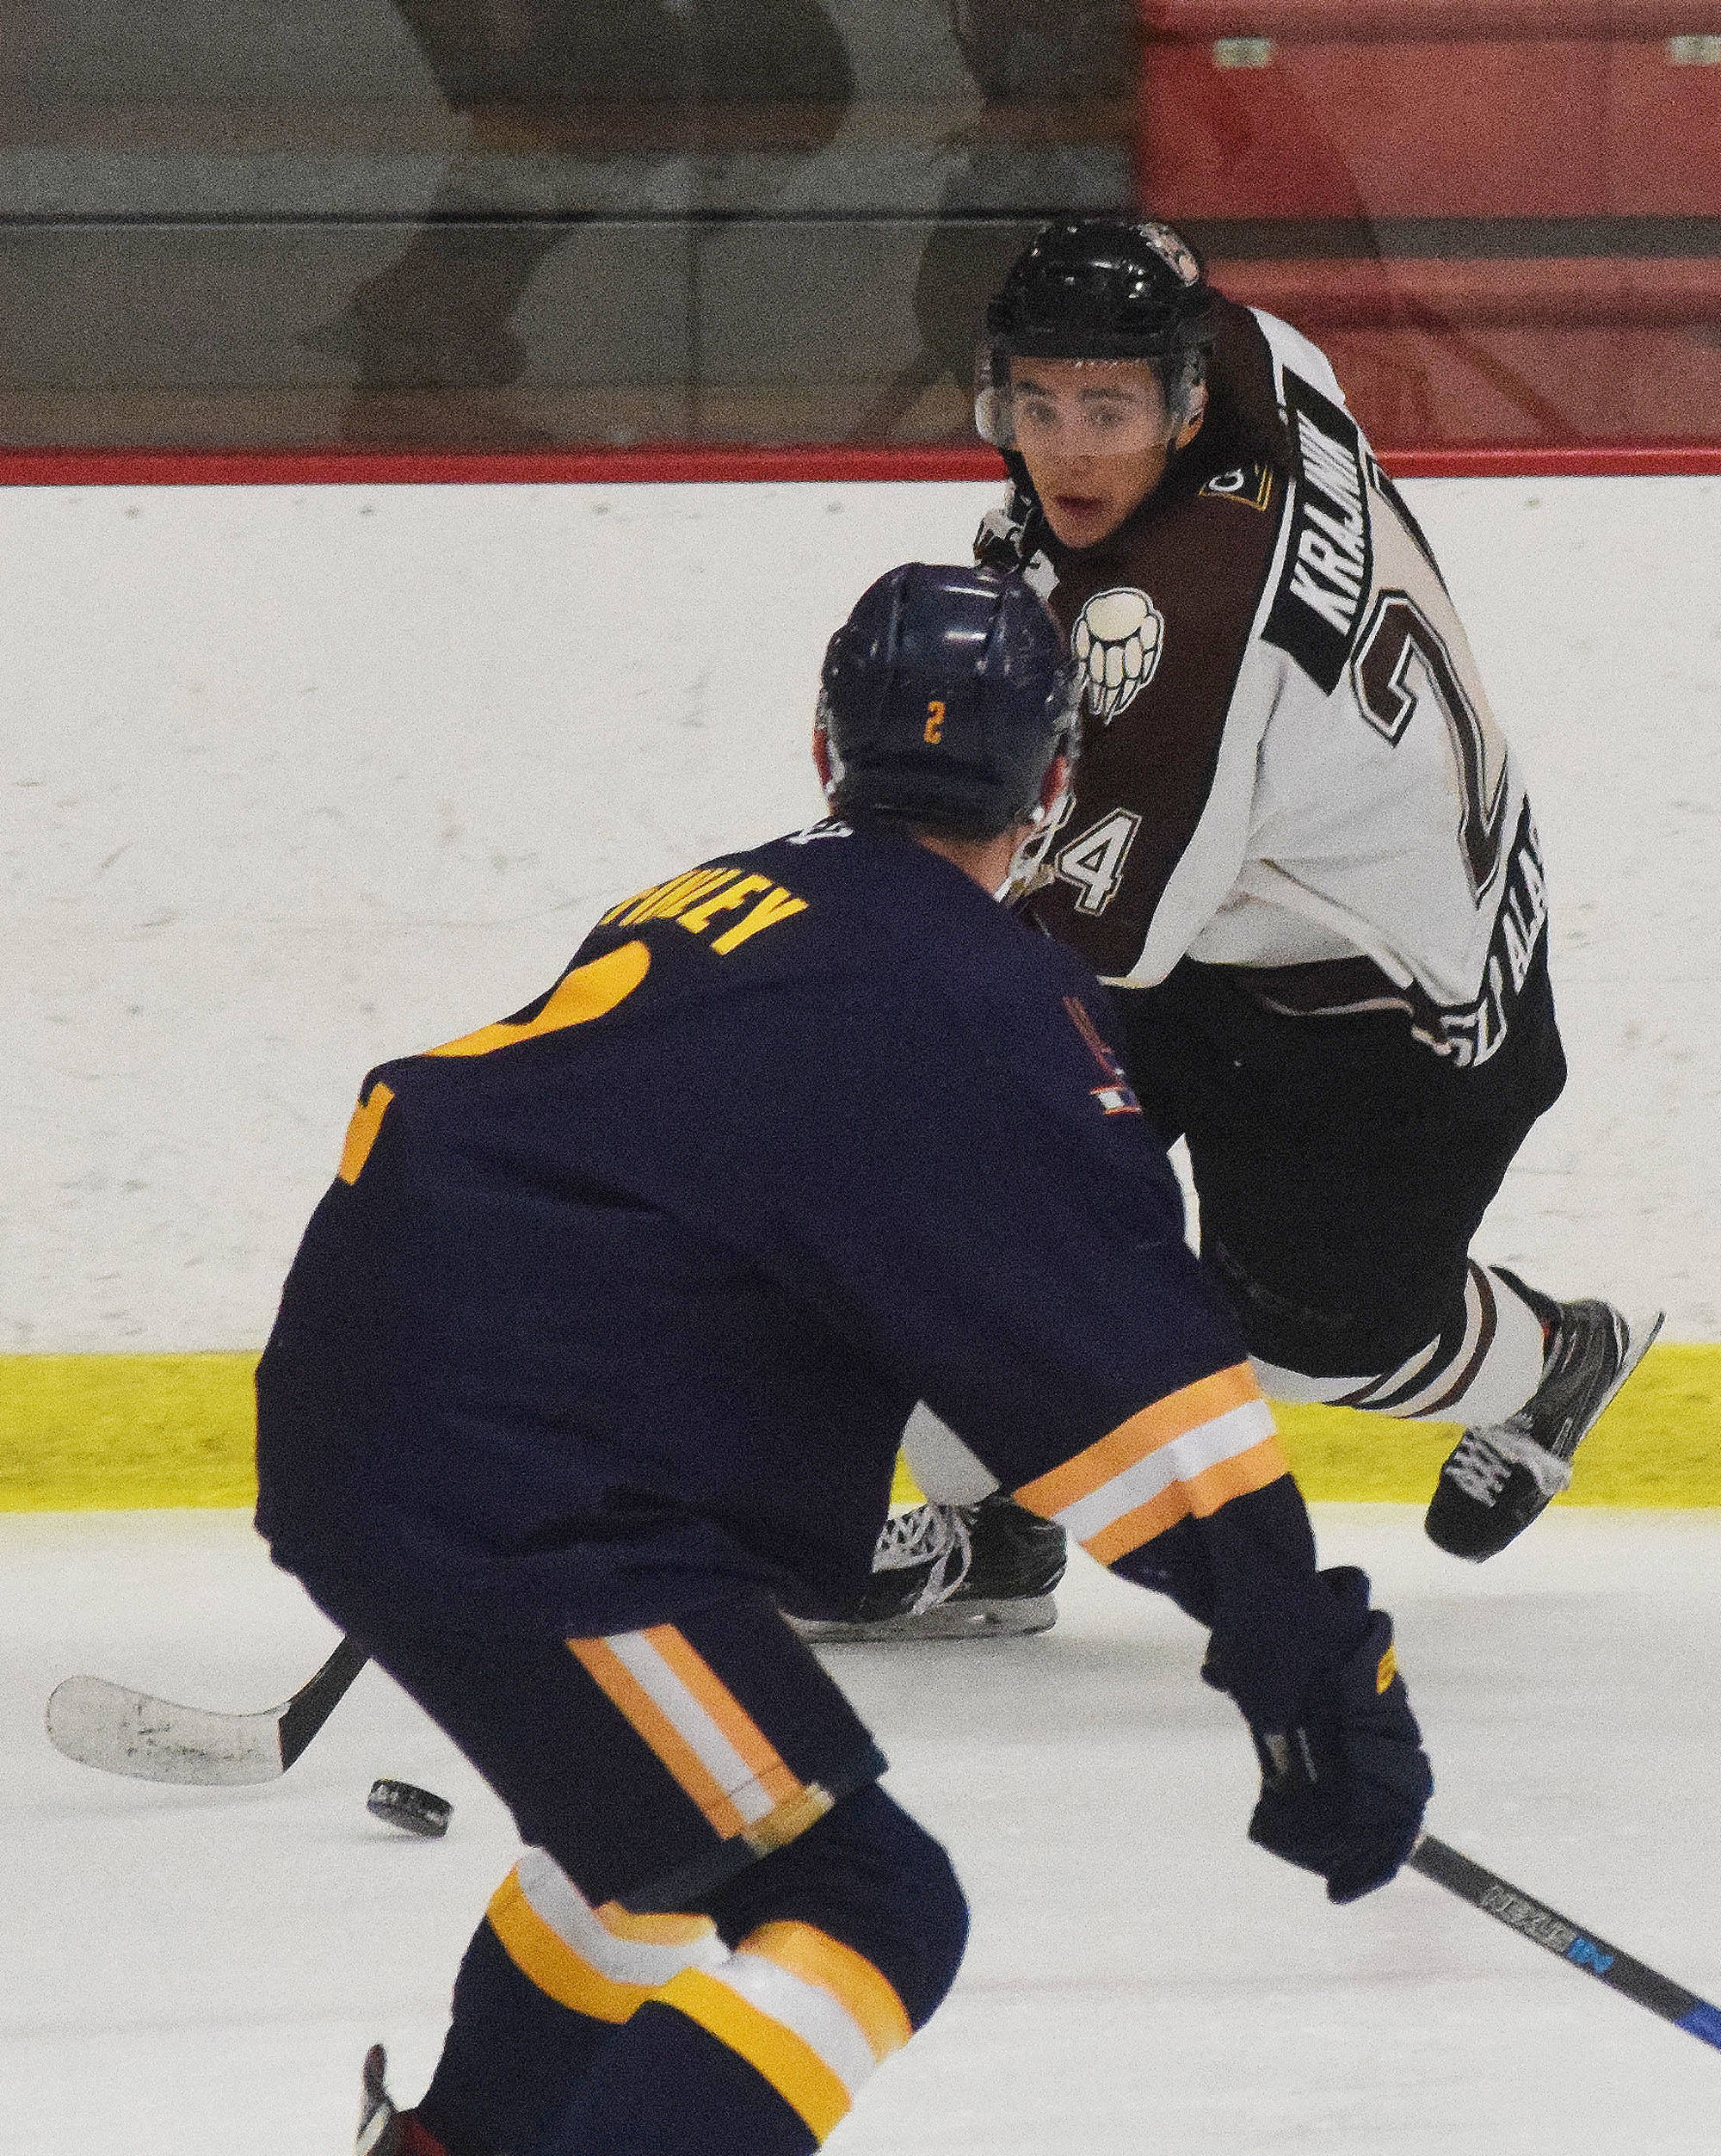 Kenai River’s Zach Krajnik looks for a way around Springfield’s Blake Finley (front) Thursday night in a North American Hockey League contest against the Springfield (Illinois) Jr. Blues at the Soldotna Regional Sports Complex. (Photo by Joey Klecka/Peninsula Clarion)